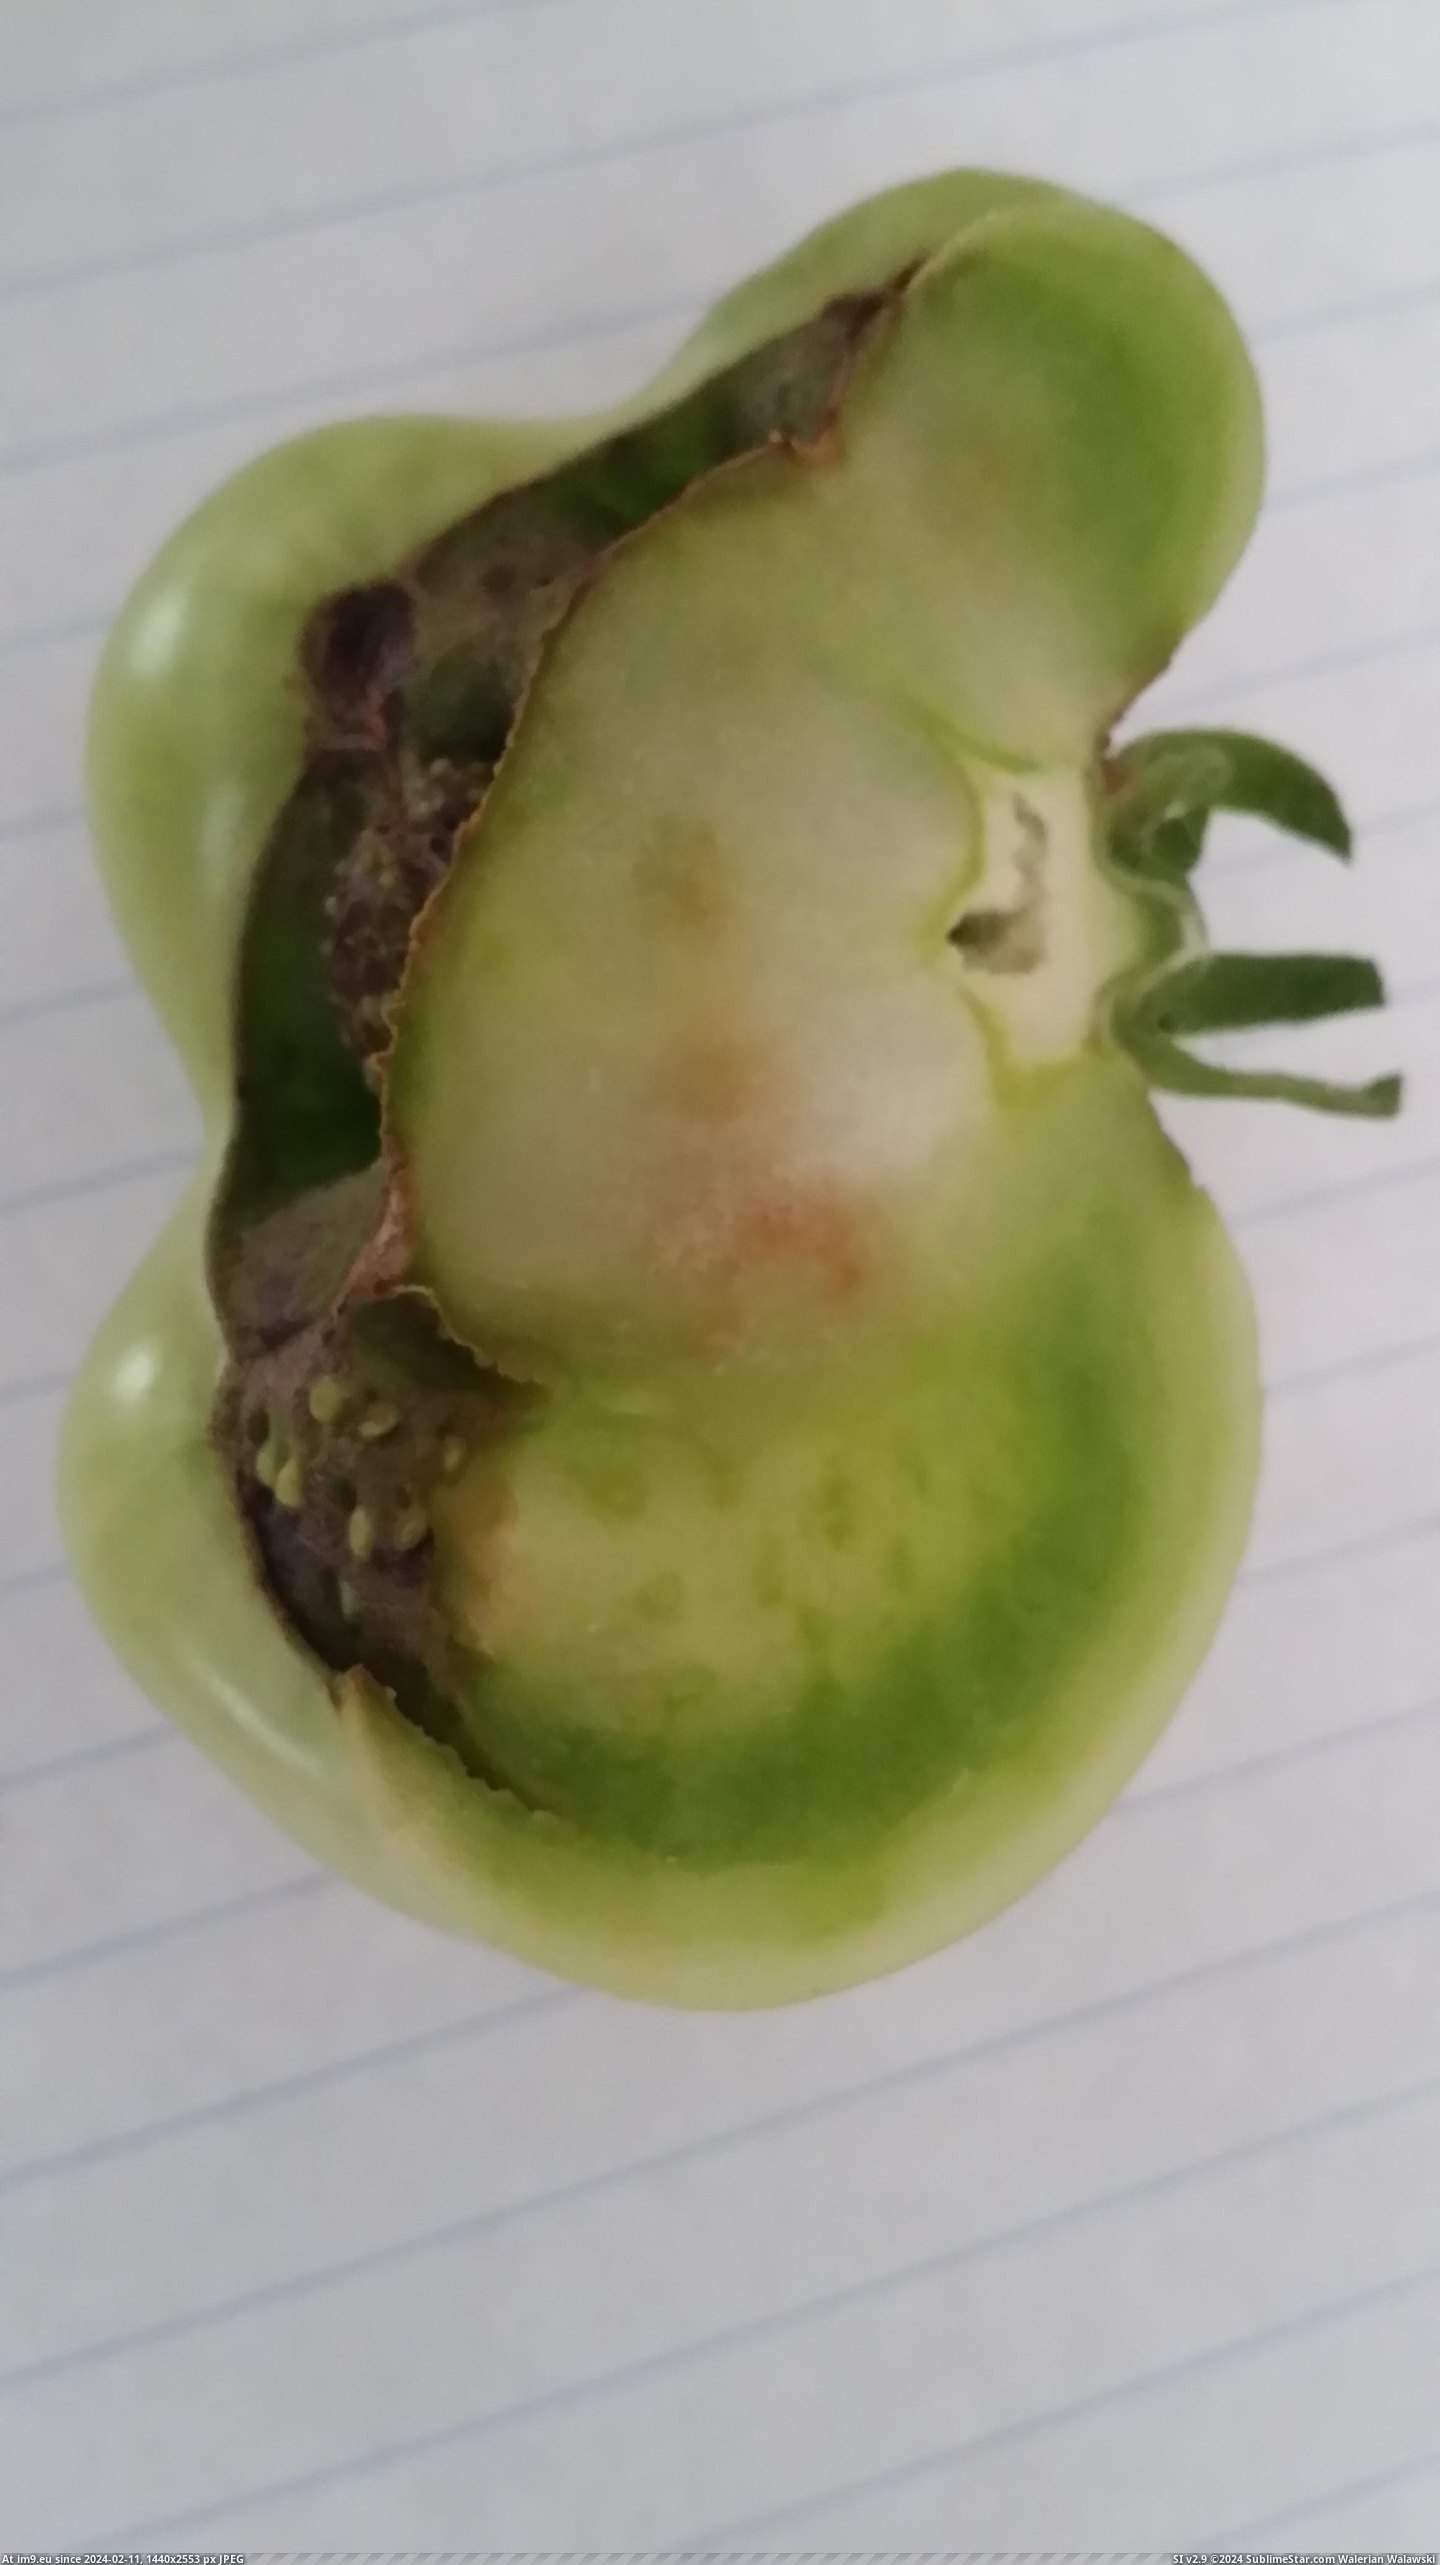 #Created #Strawberry #Hybrid #Fused #Tomato #Seeds [Mildlyinteresting] Our tomato seeds fused with our strawberry seeds and created a hybrid 1 Pic. (Obraz z album My r/MILDLYINTERESTING favs))